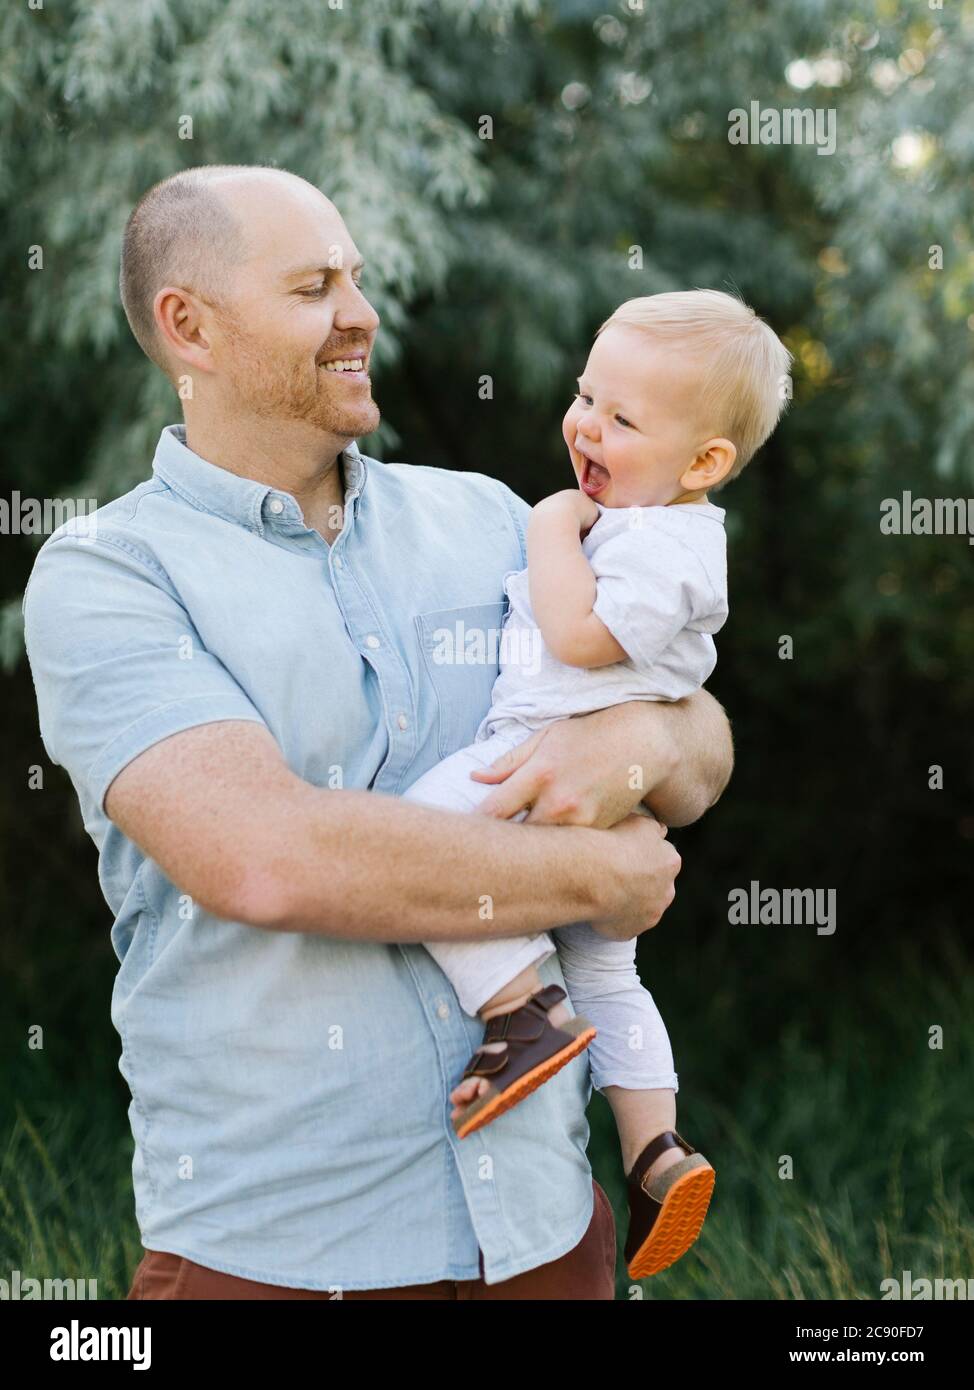 Outdoor portrait of father carrying baby son Stock Photo